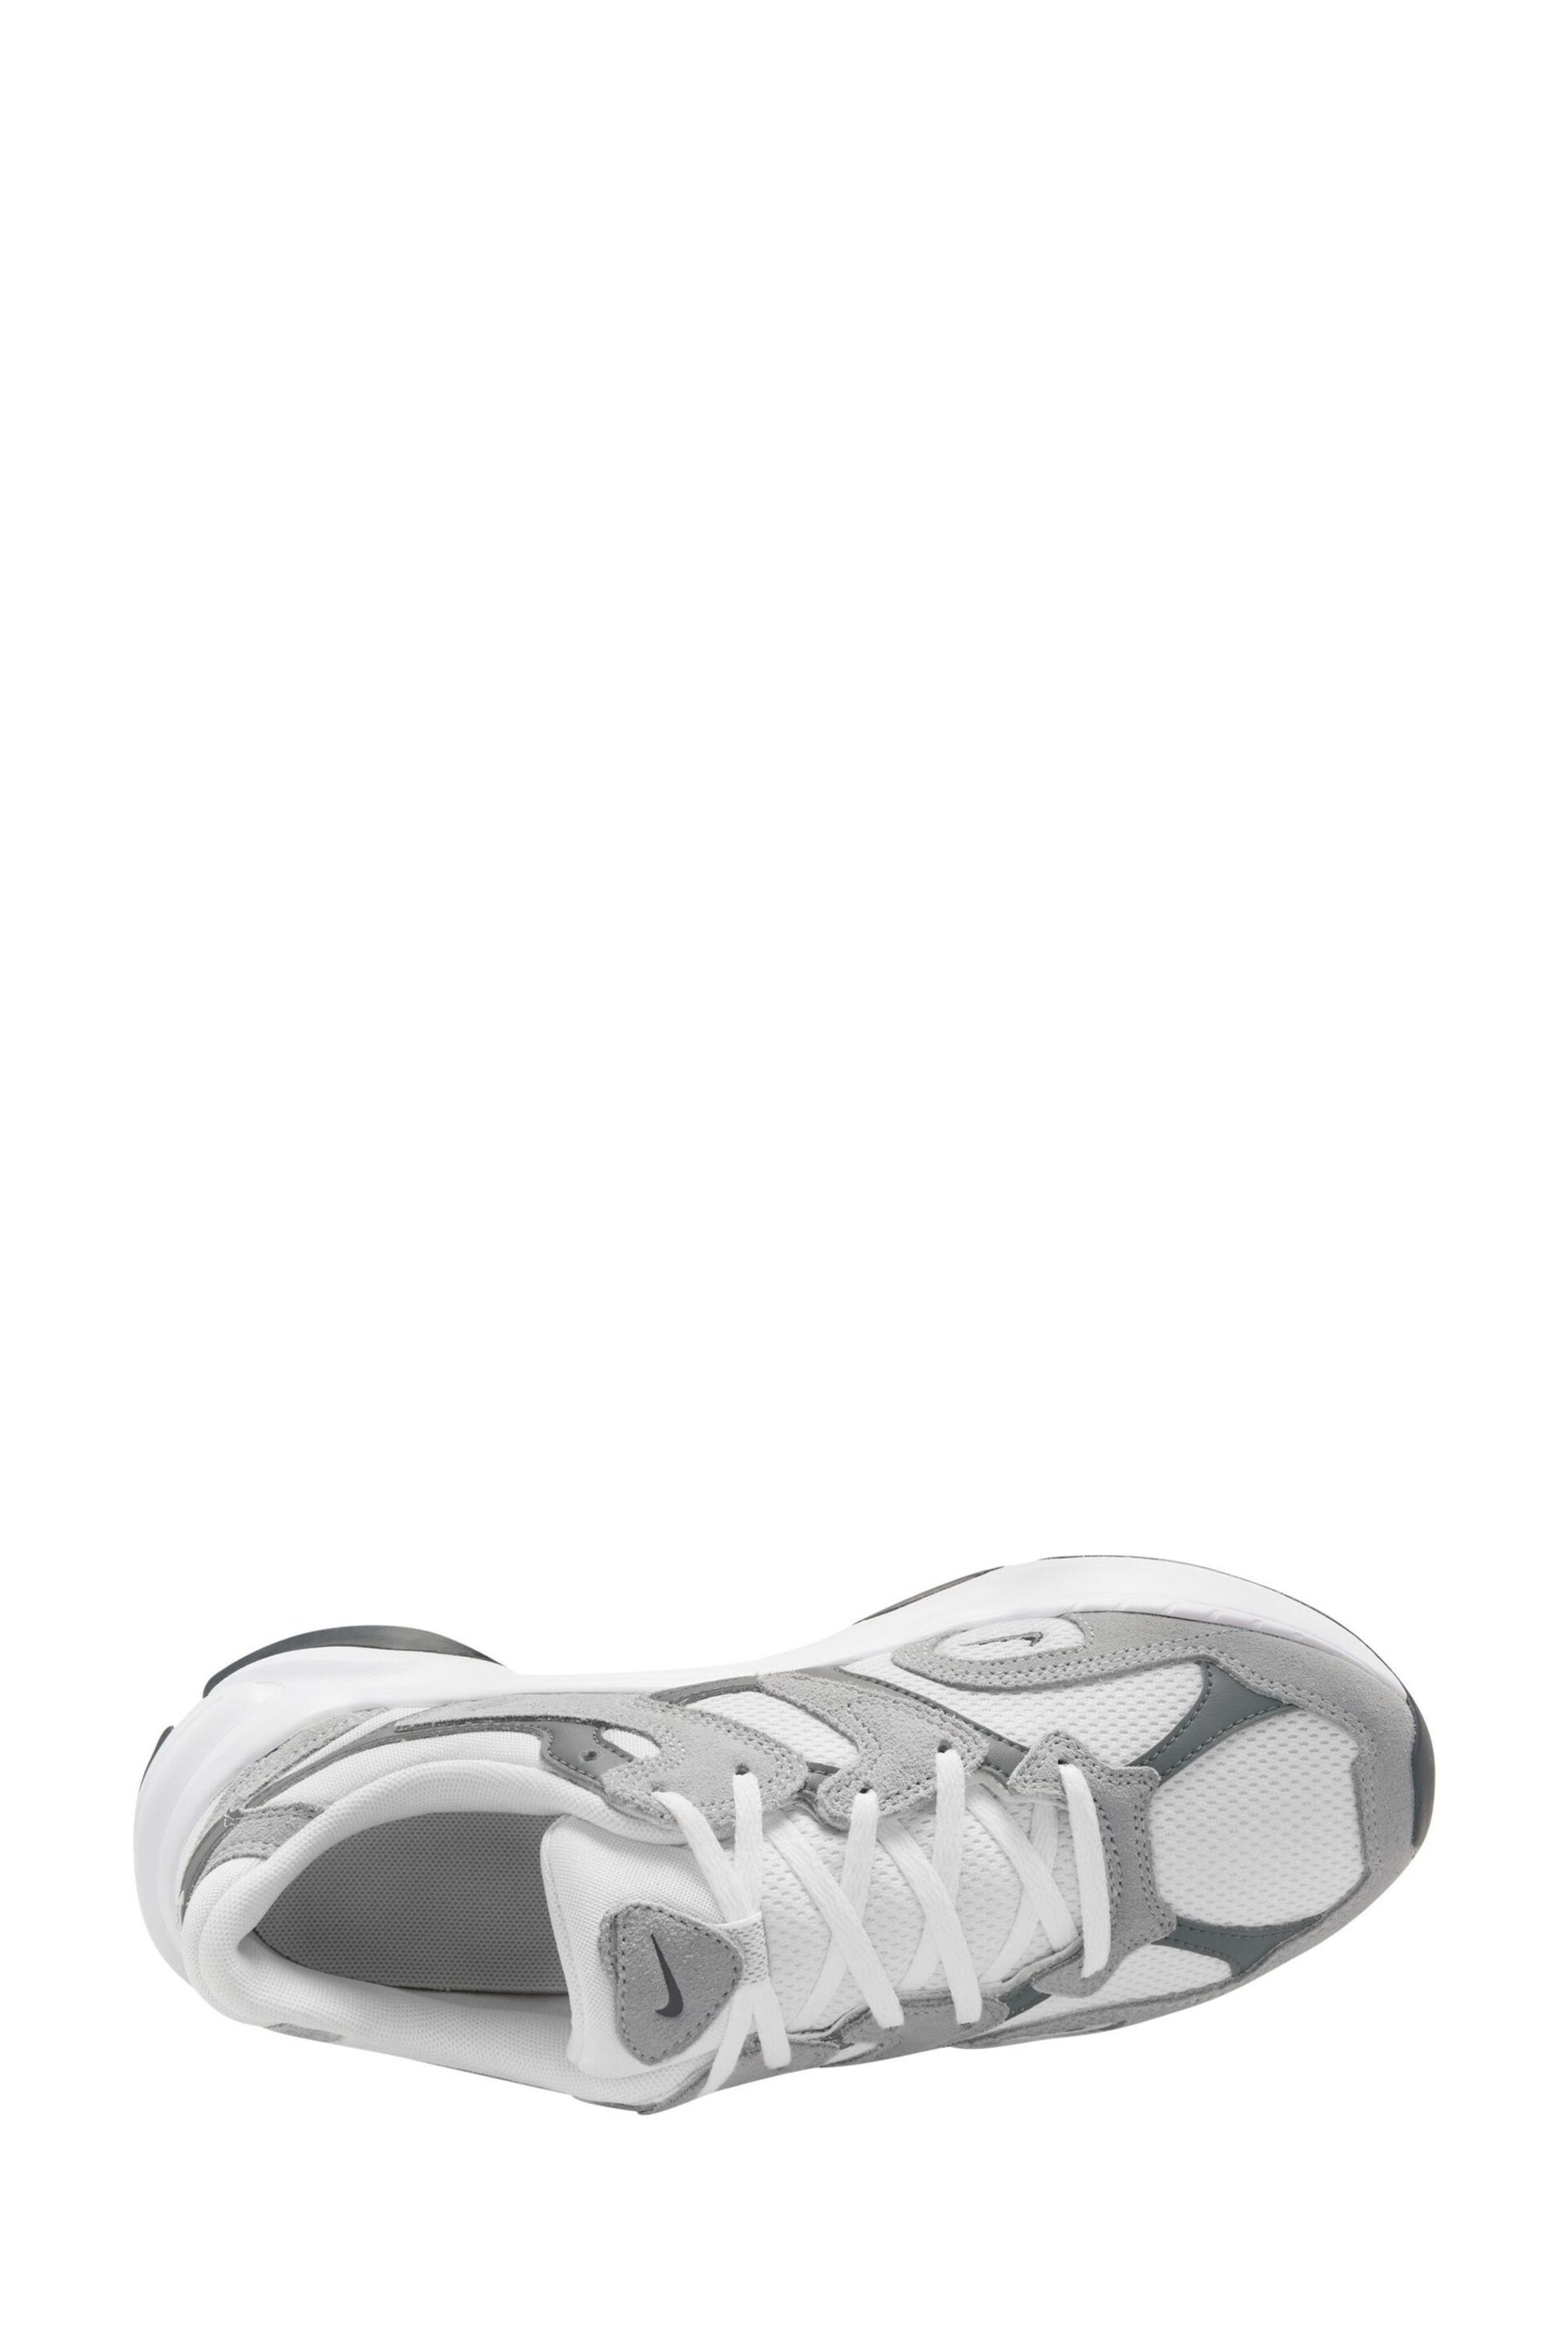 Nike Grey/White AL8 Running Trainers - Image 9 of 13